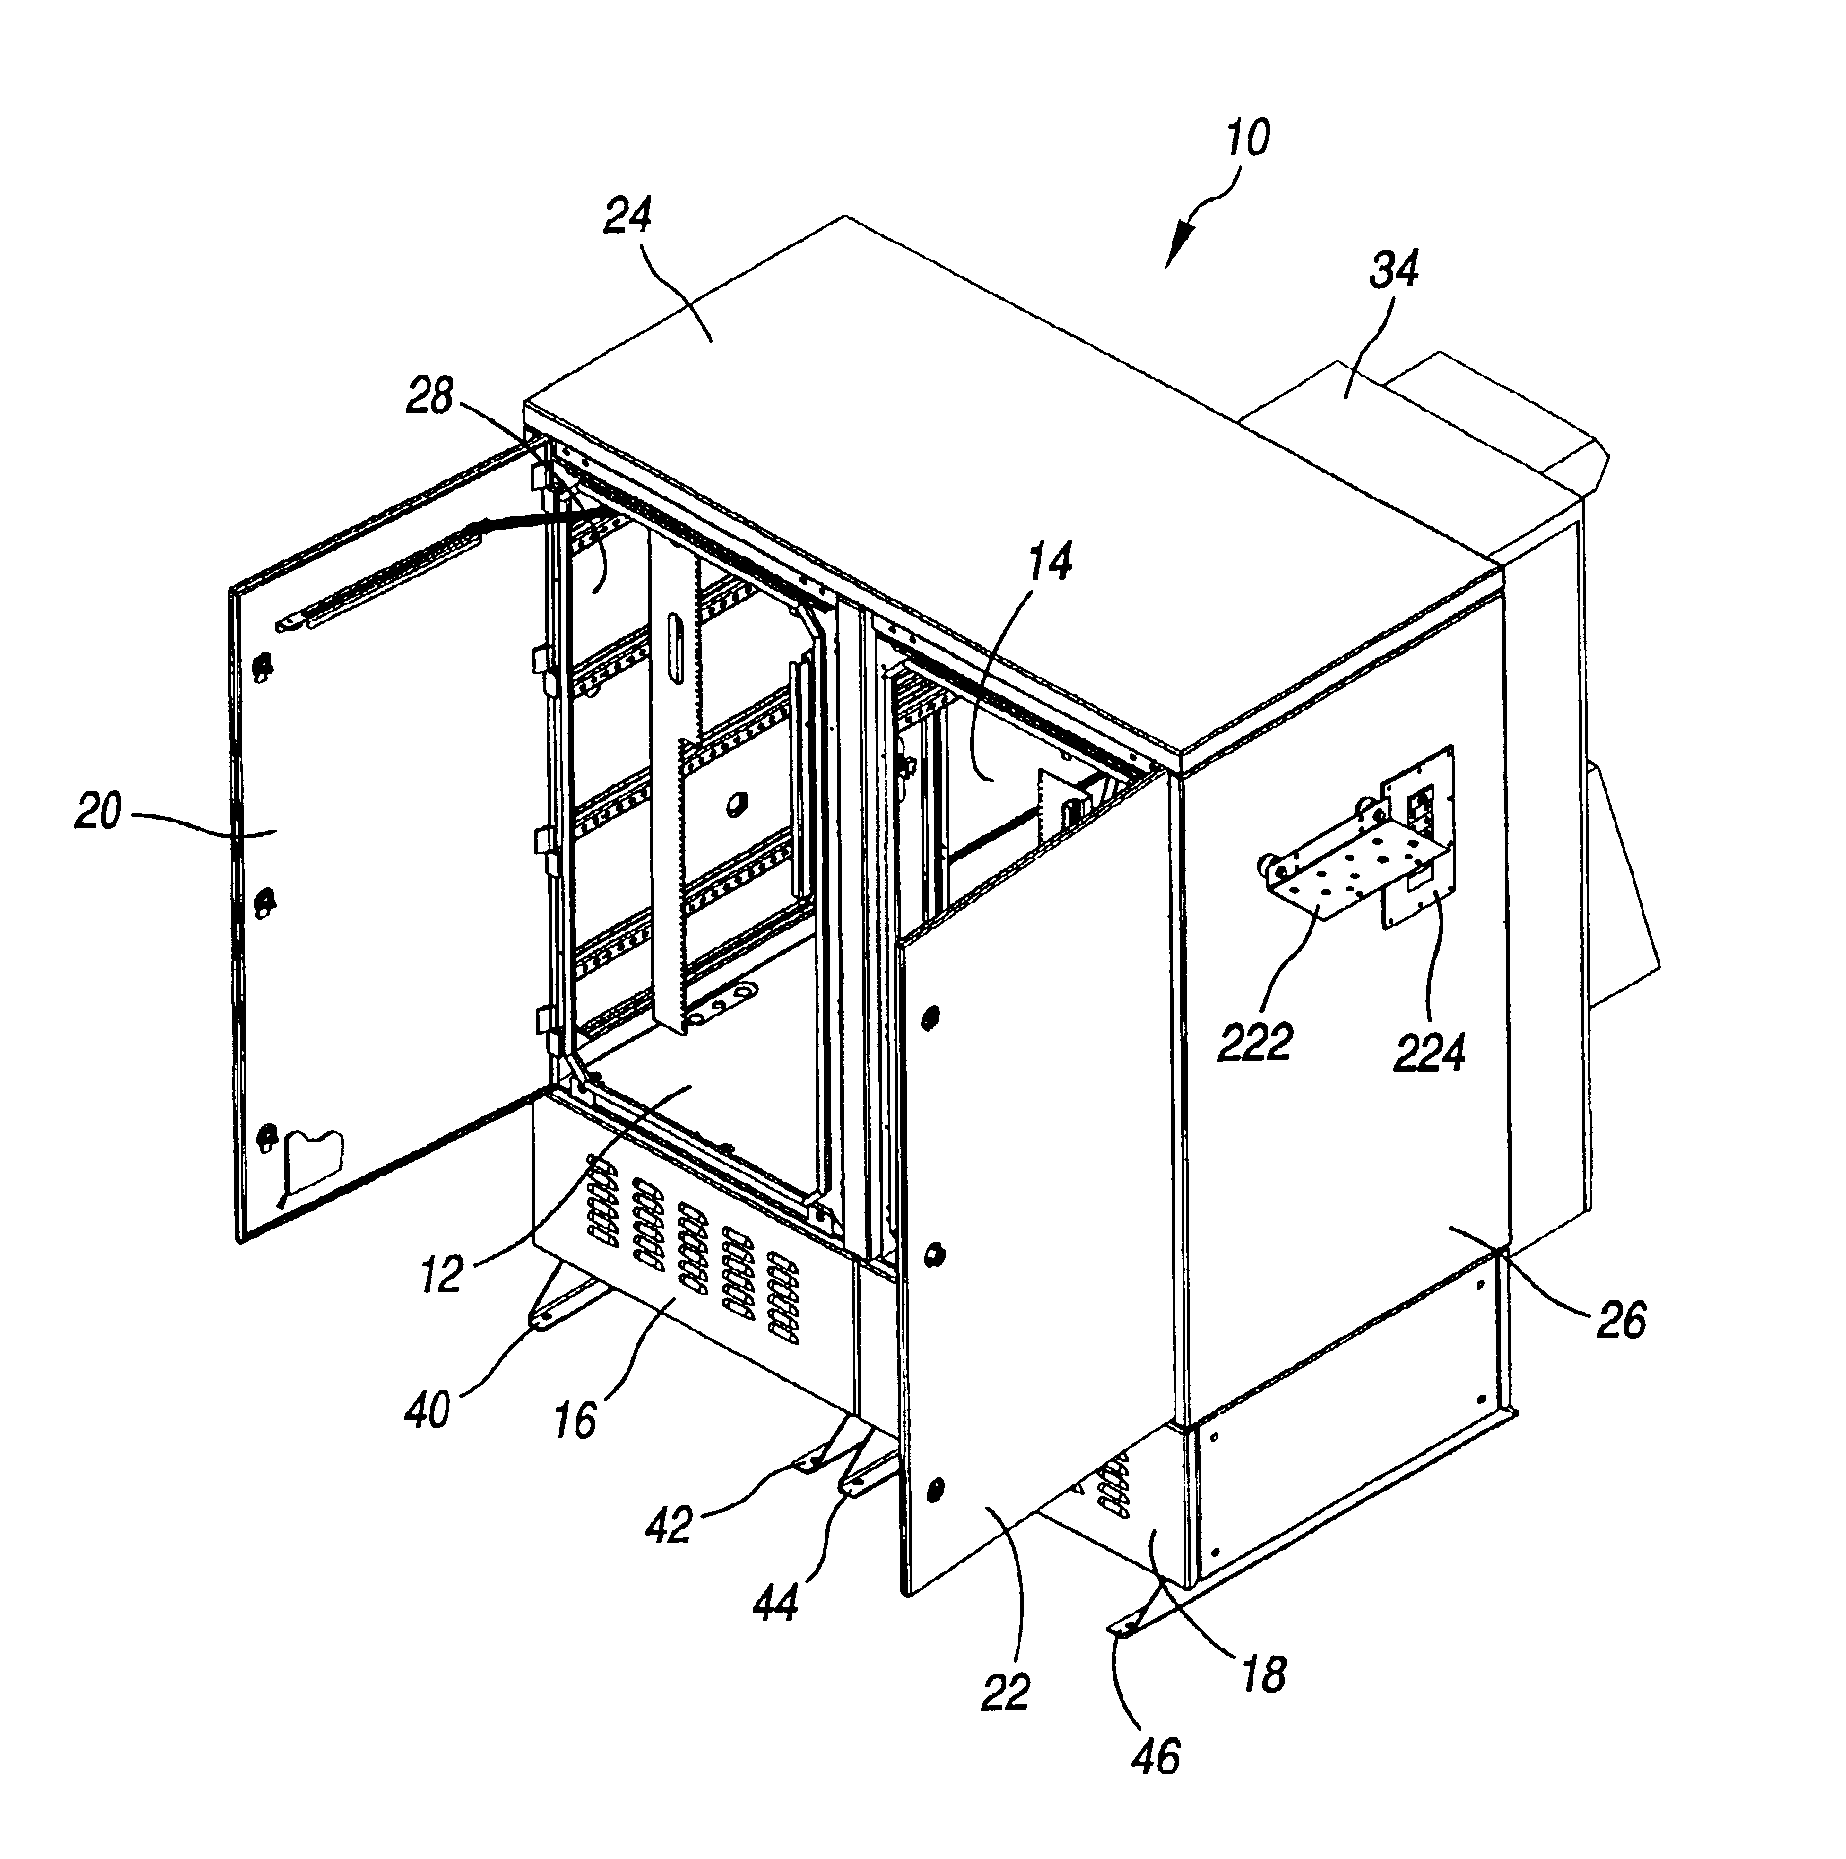 Modular enclosure system for electronic equipment